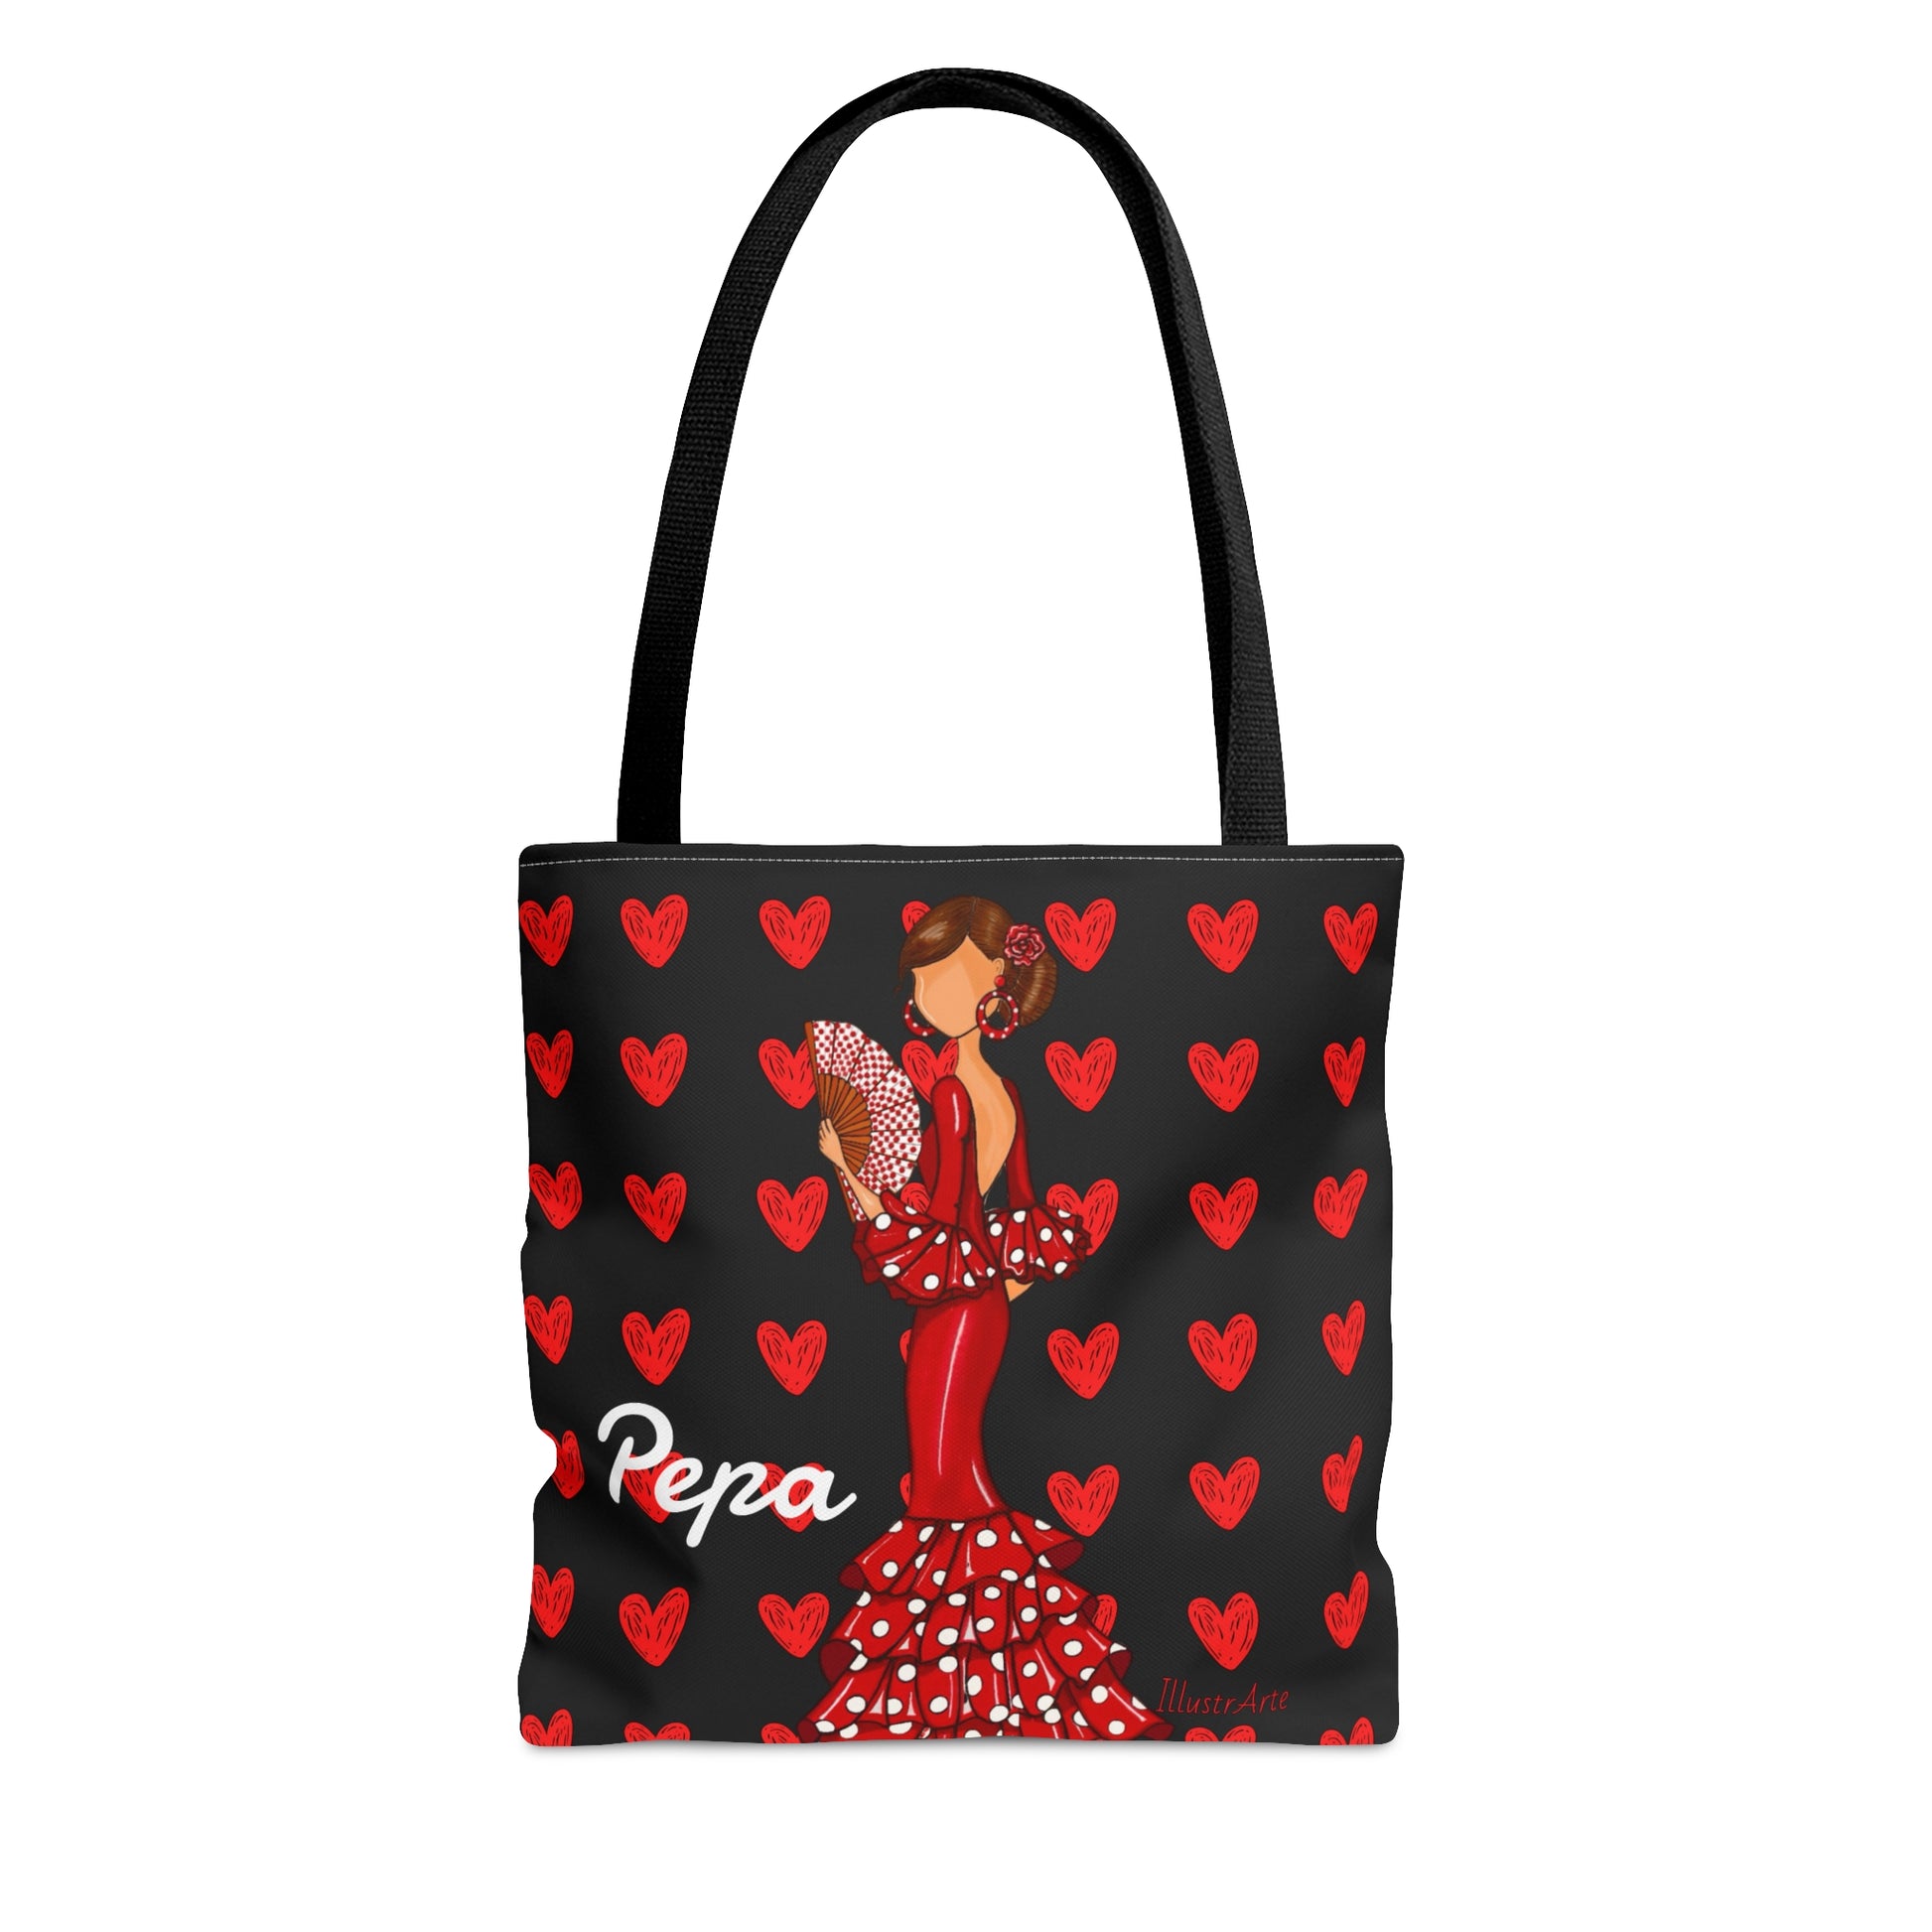 a black tote bag with a lady in a red dress holding a fan